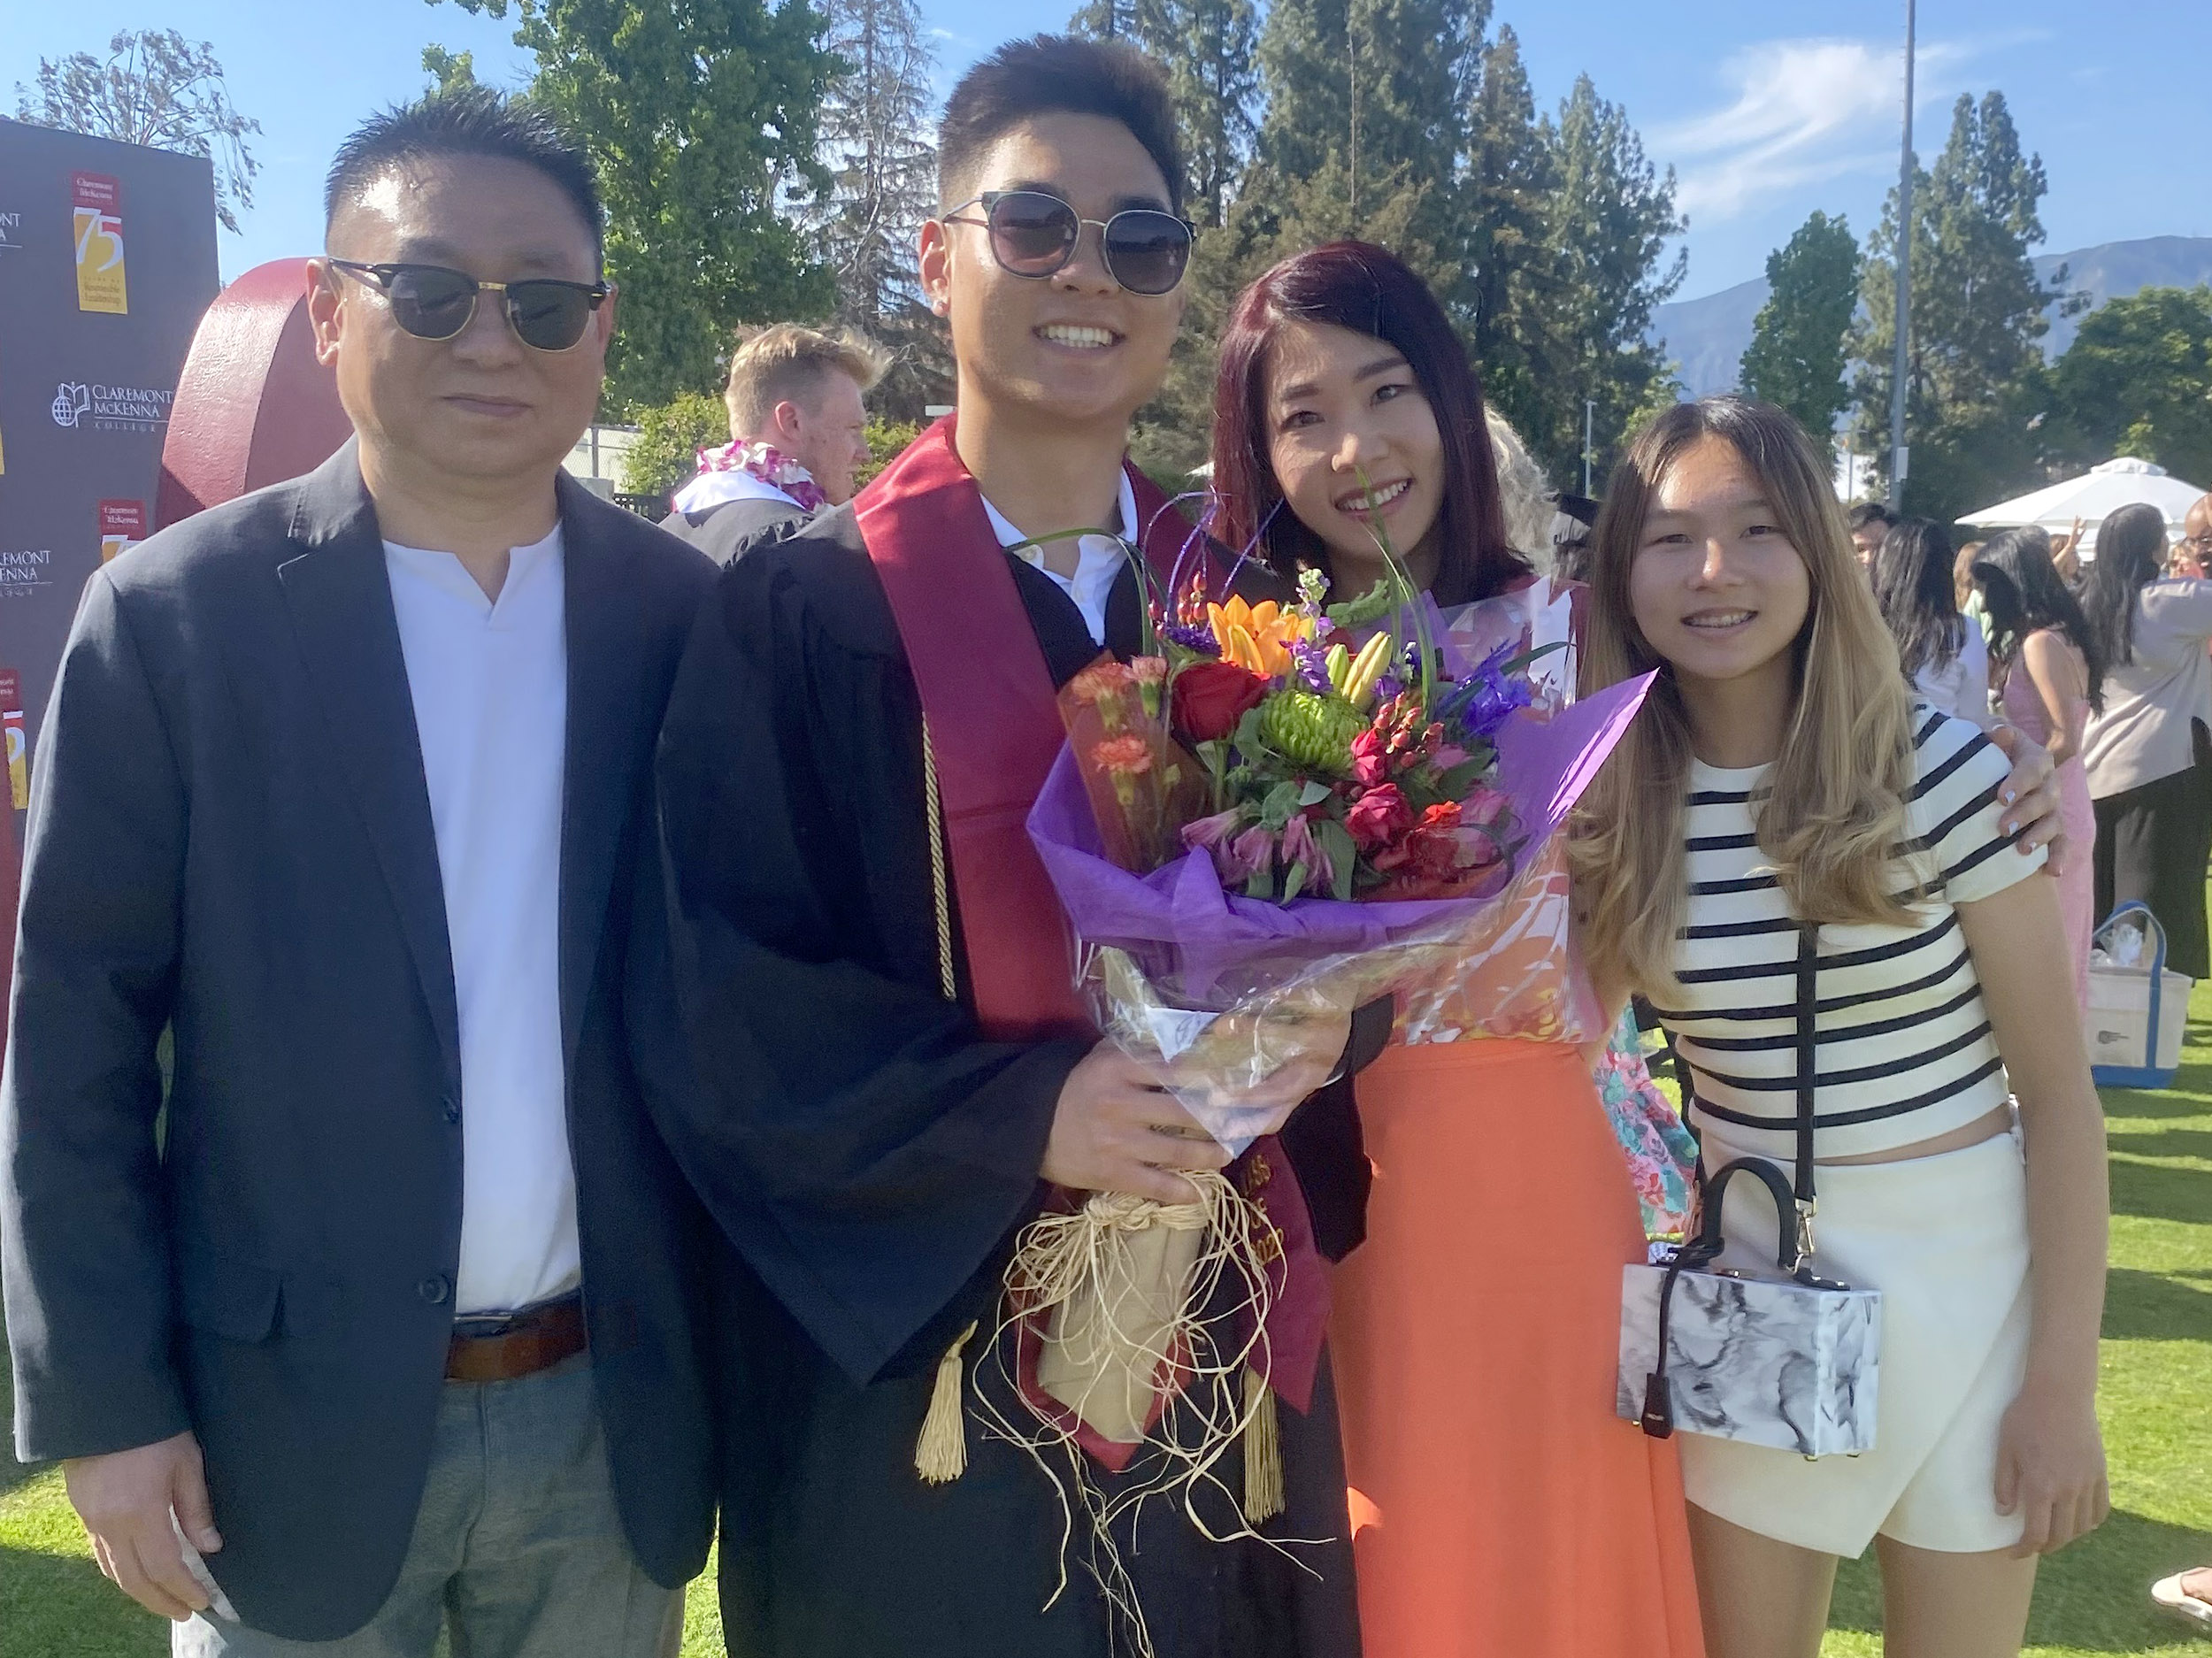 Calvin Koo ’22 stands surrounded by his family out on the field during CMC's 2022 Commencement.